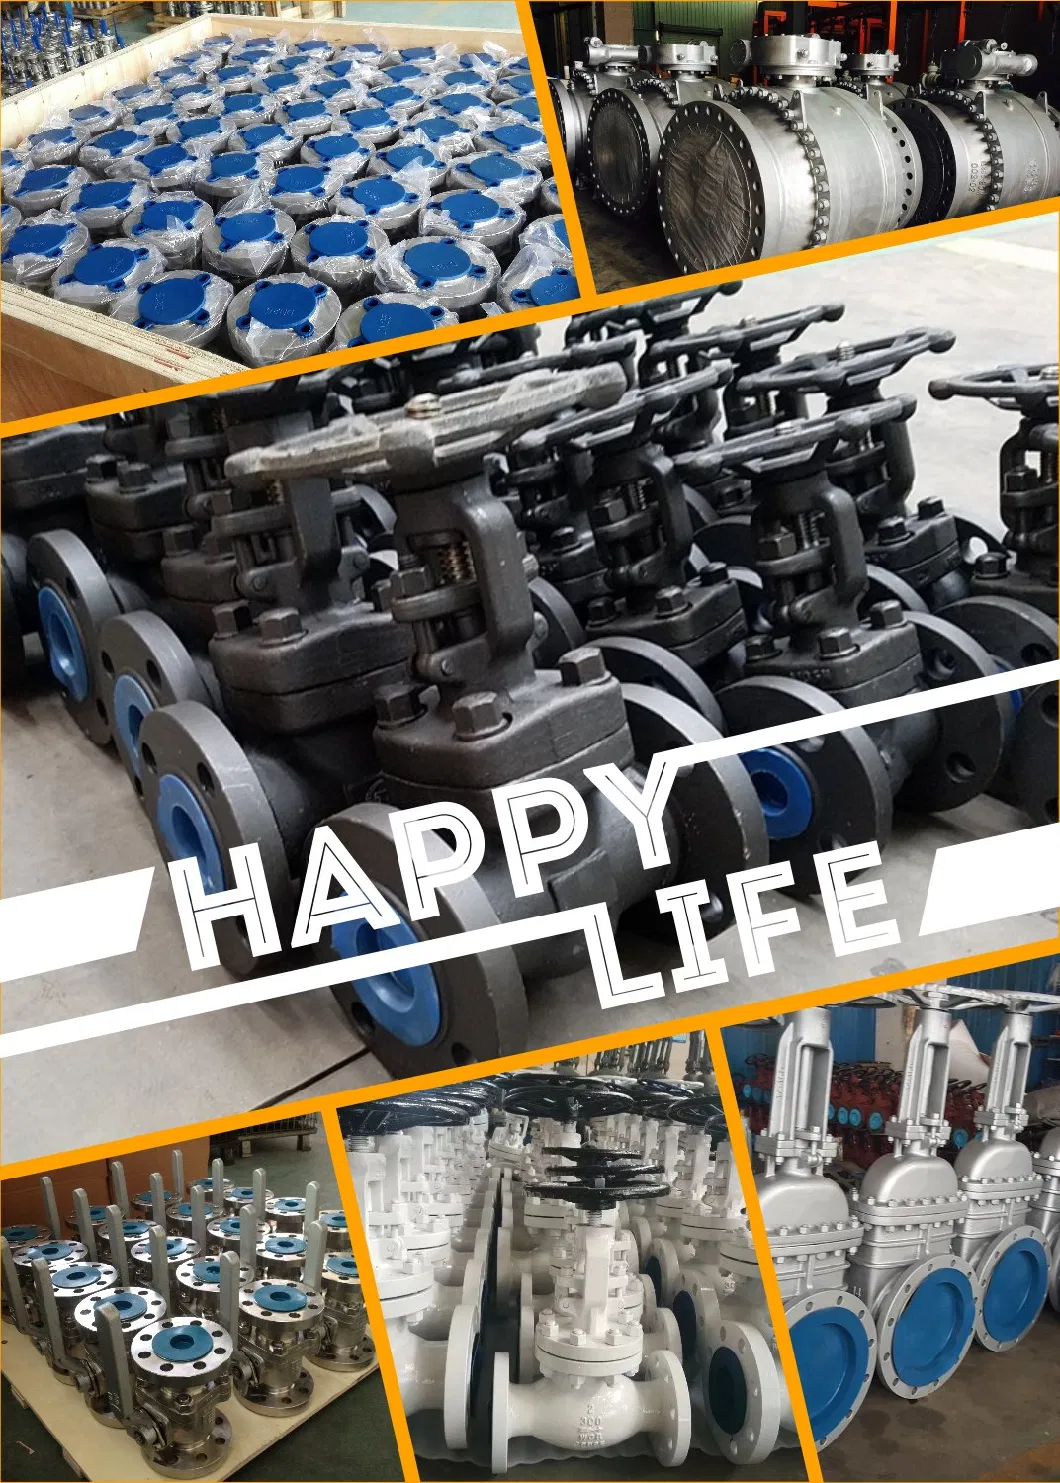 API 6D Fire Safety Nace Mr 0175 Full Port/Reduce Port Oil Gas GB/ANSI Wcb/CF8/CF8m Worm Gear Operated Flange Floating Pneumatic/Electric Forged Ball Valves